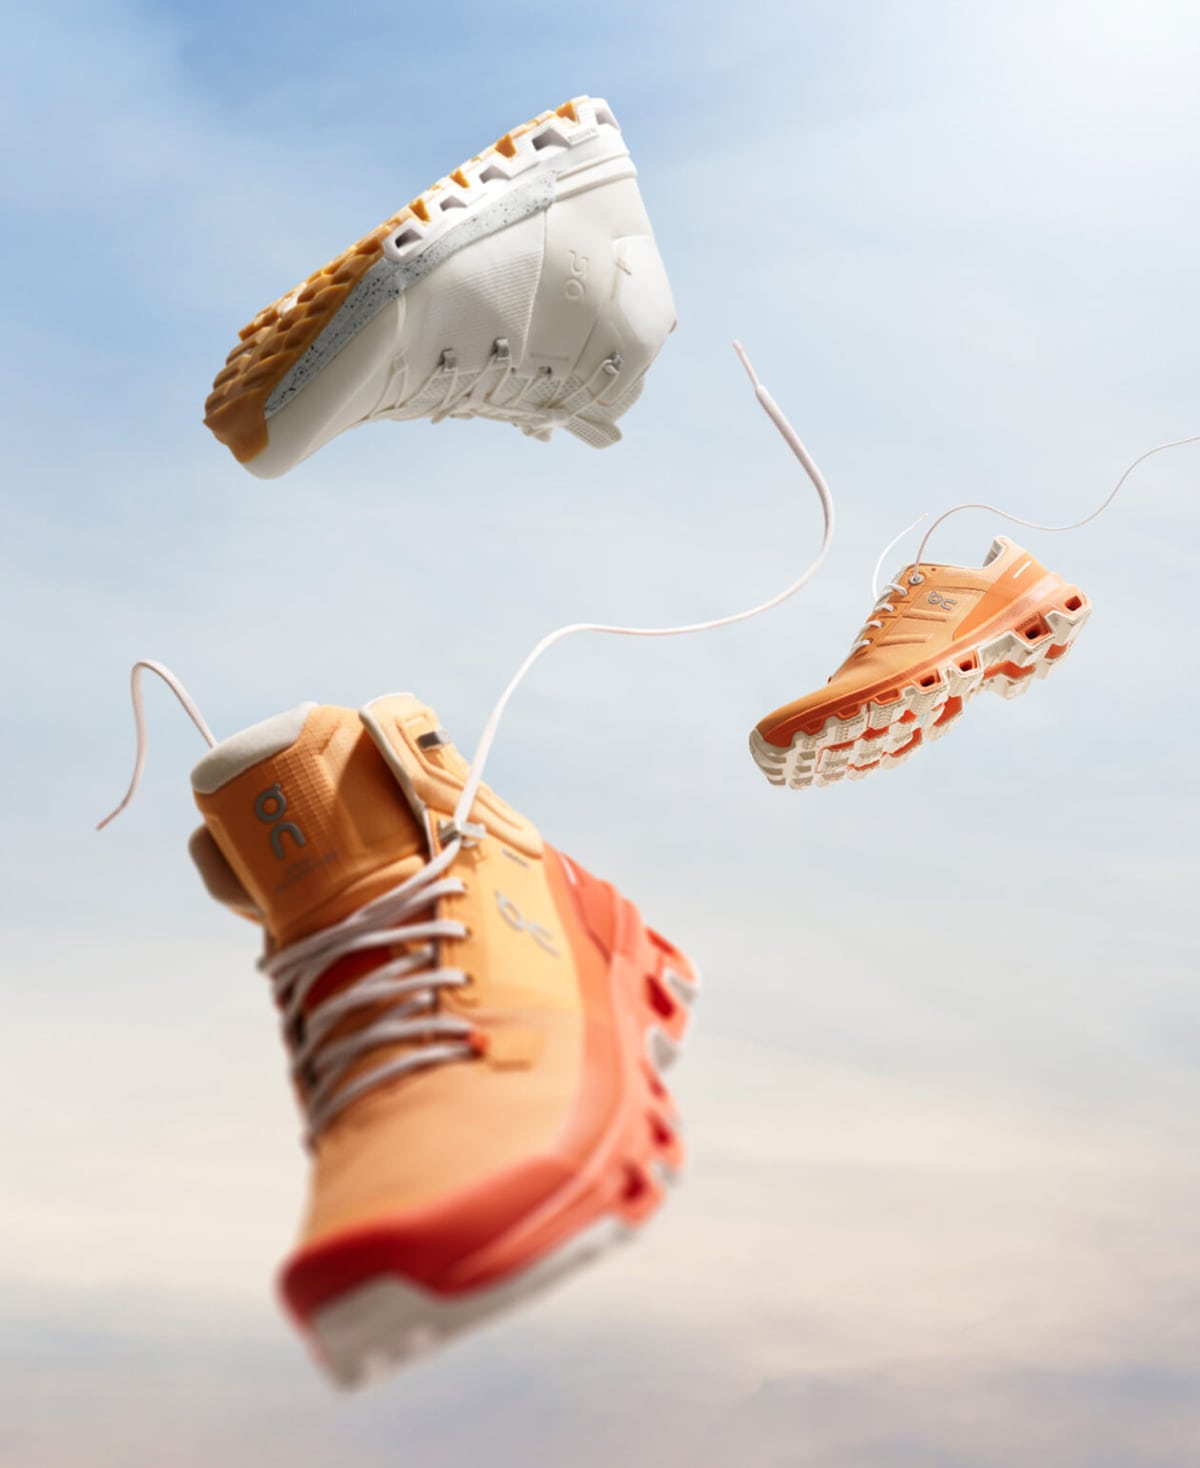 On Cloud Shoes: The Science Behind Their Popularity